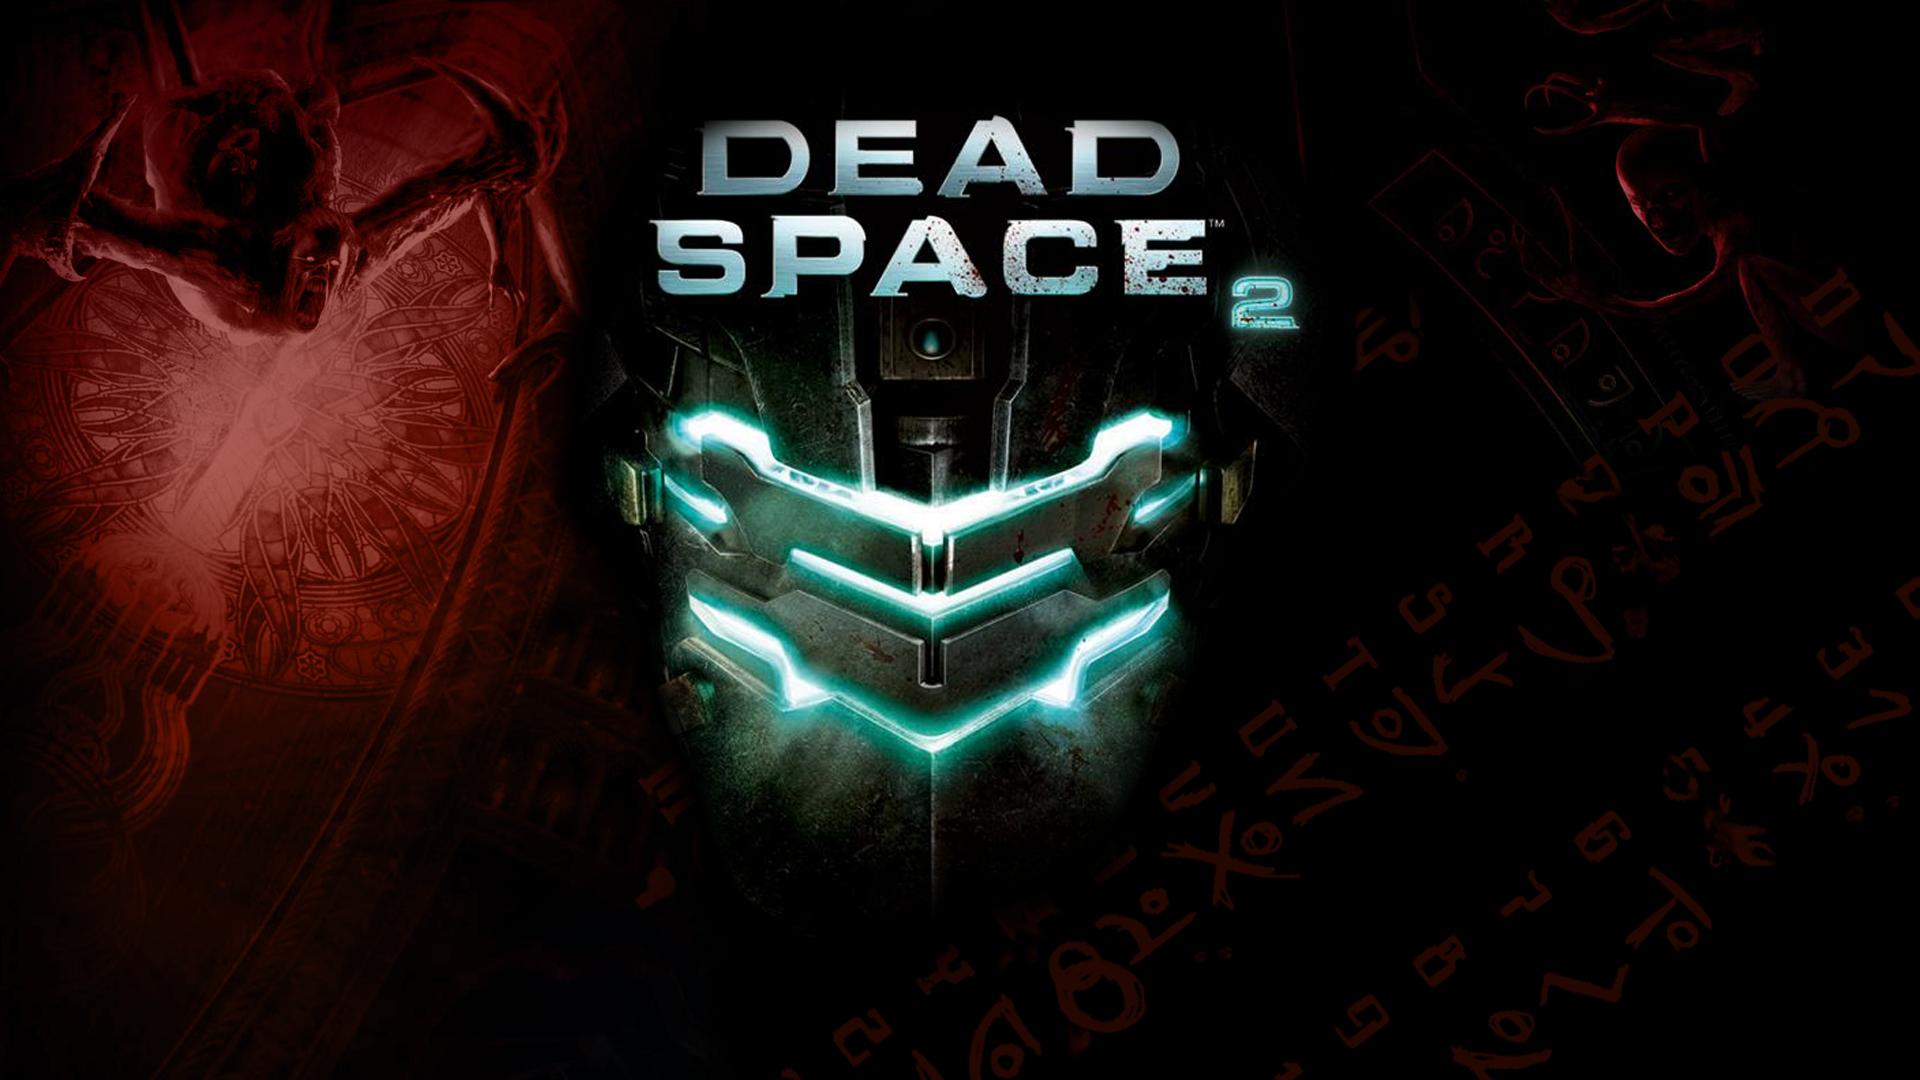 dead space 2 game wallpaper hd free download games picture | View HD